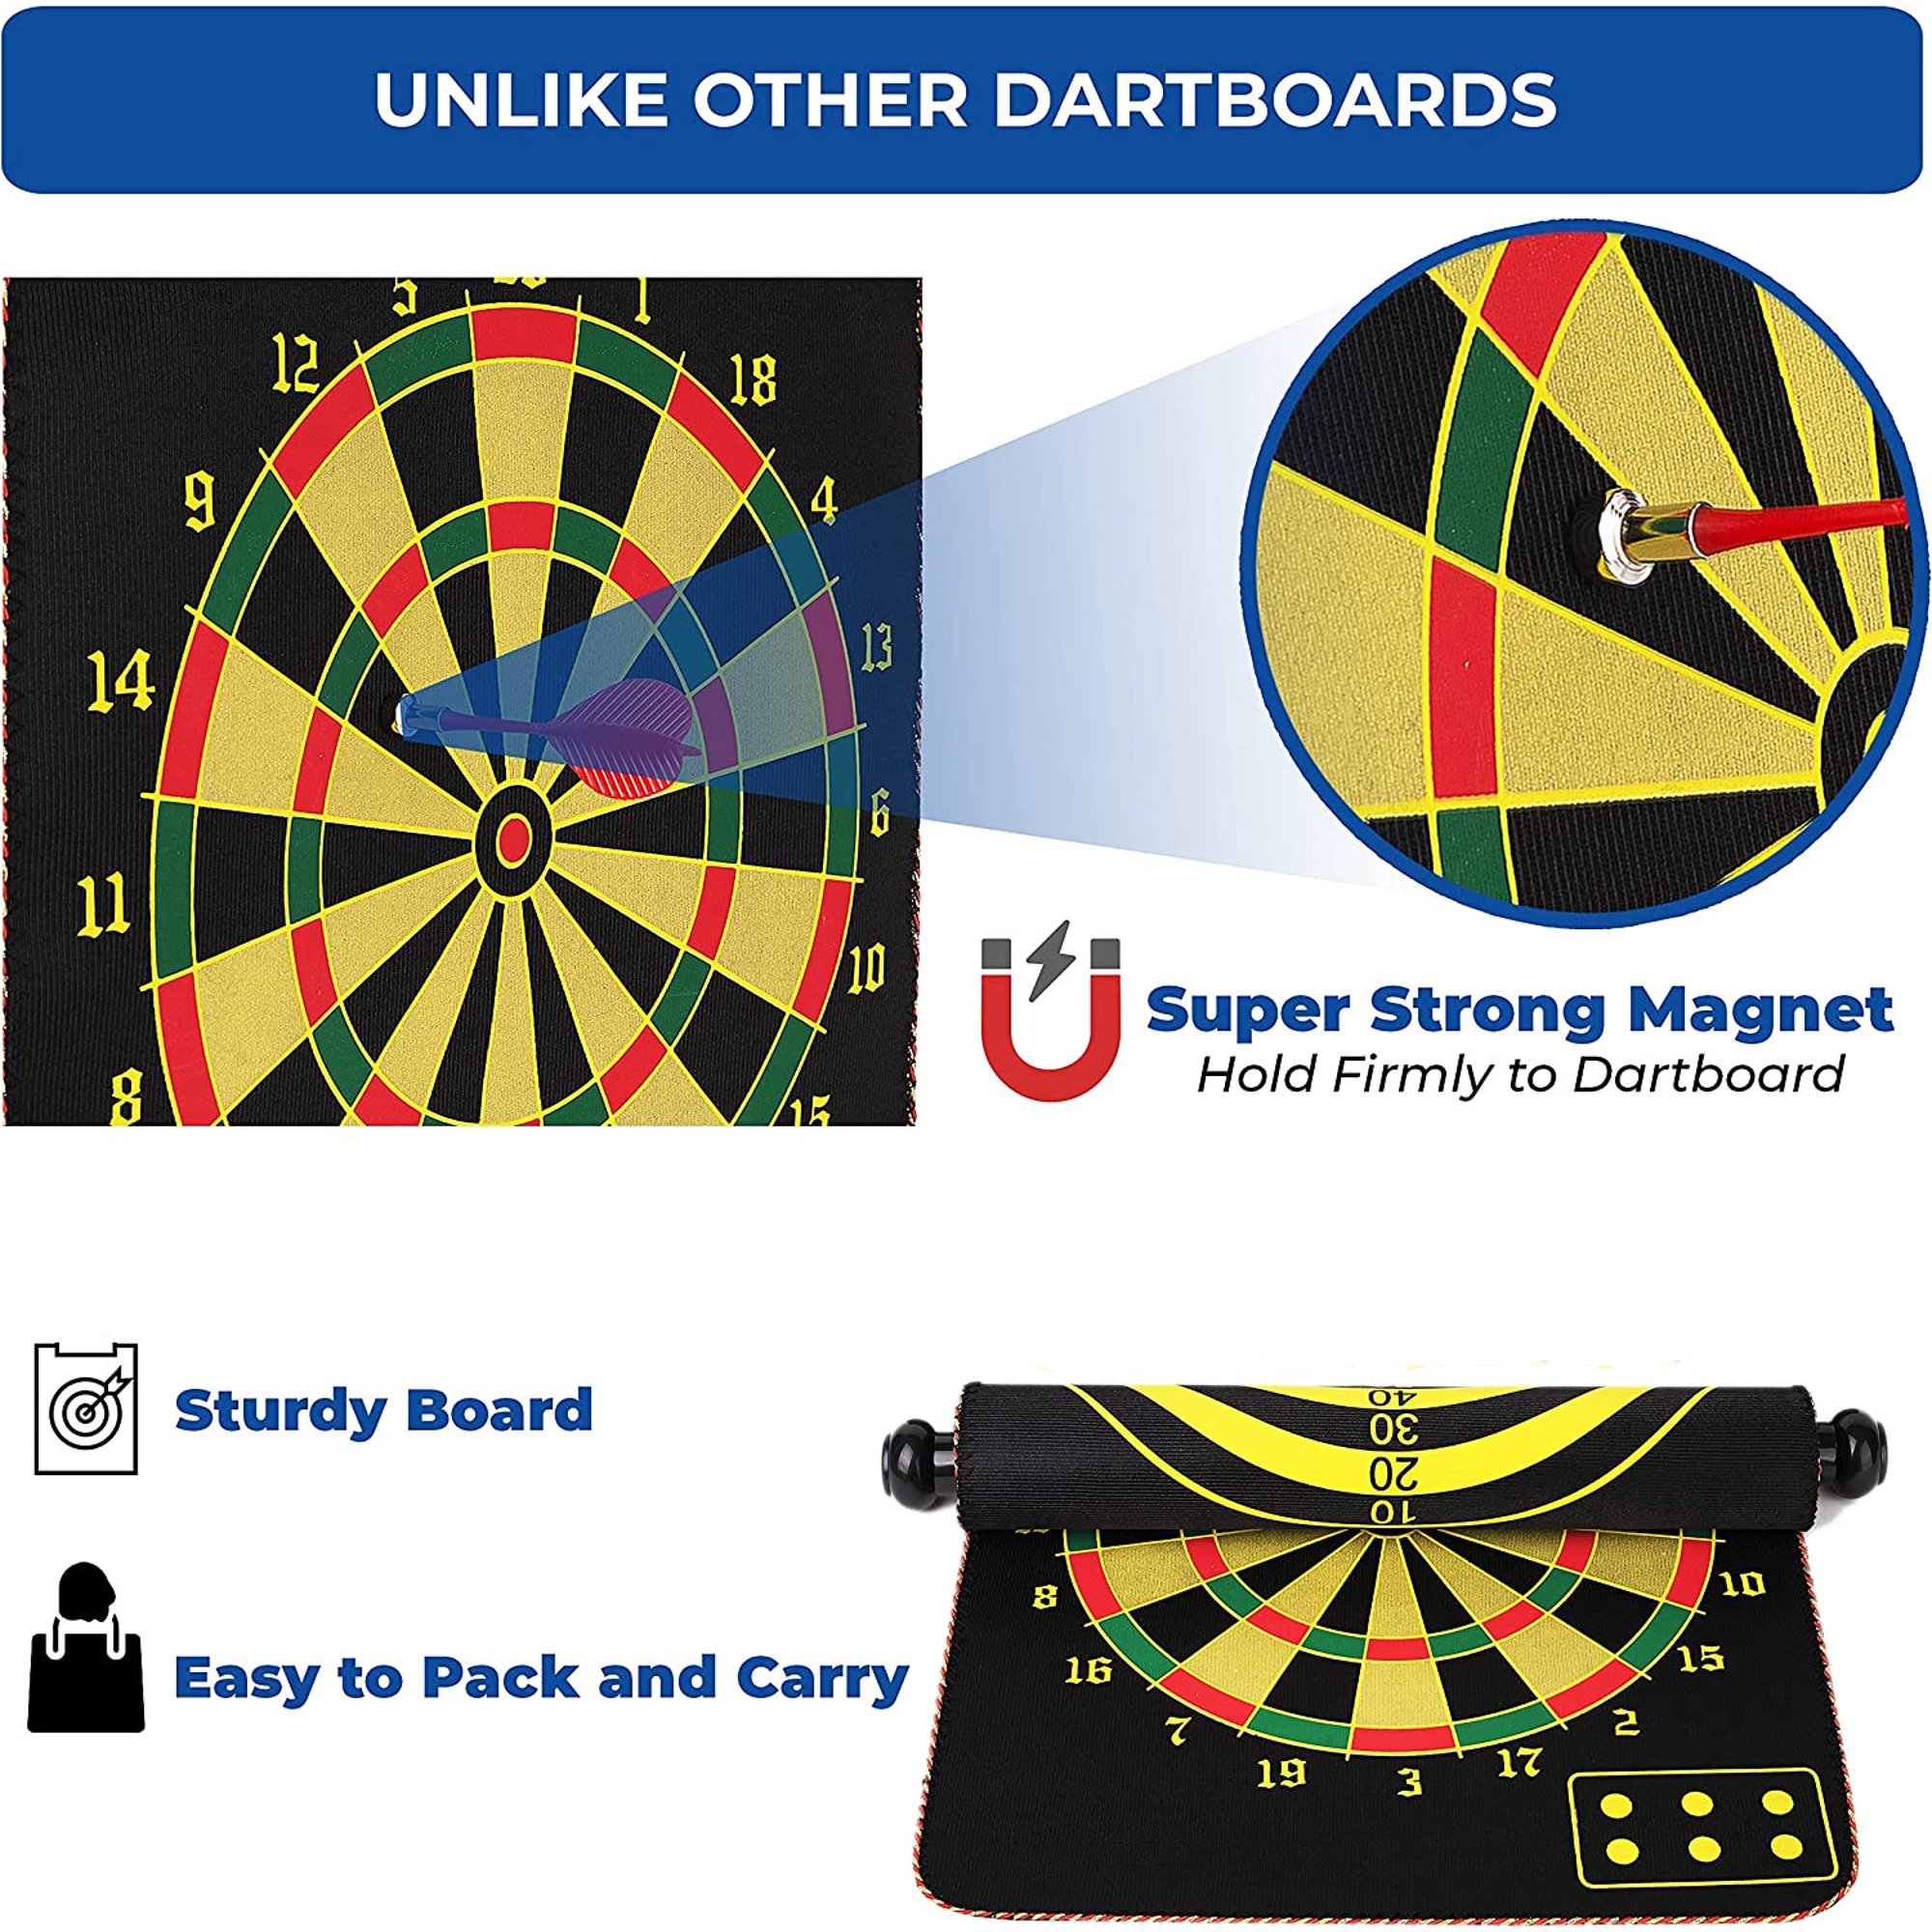 "Magnetic Dart Board, Happiwiz Safe Party Games Indoor Outdoor, Cool Toy Gifts for 5 6 7 8 9 10 11 12 13 Year Old Boy, Double-Sided, 9pcs Safe Darts, Easily Hangs Anywhere" - image 2 of 7